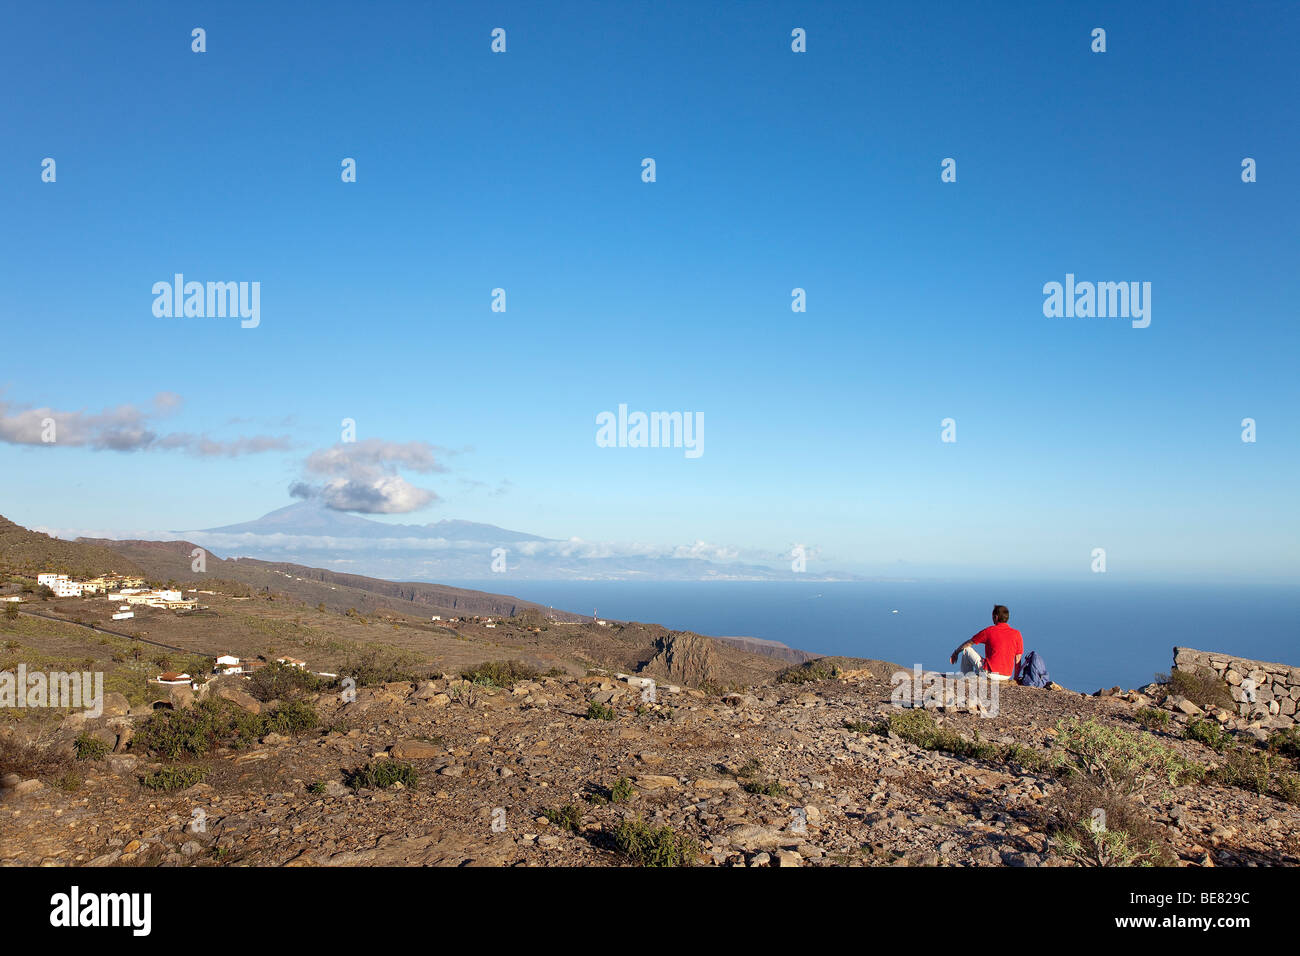 Hiker looking at the view at Teide volcano and at the sea, La Gomera, Canary Islands, Spain, Europe Stock Photo